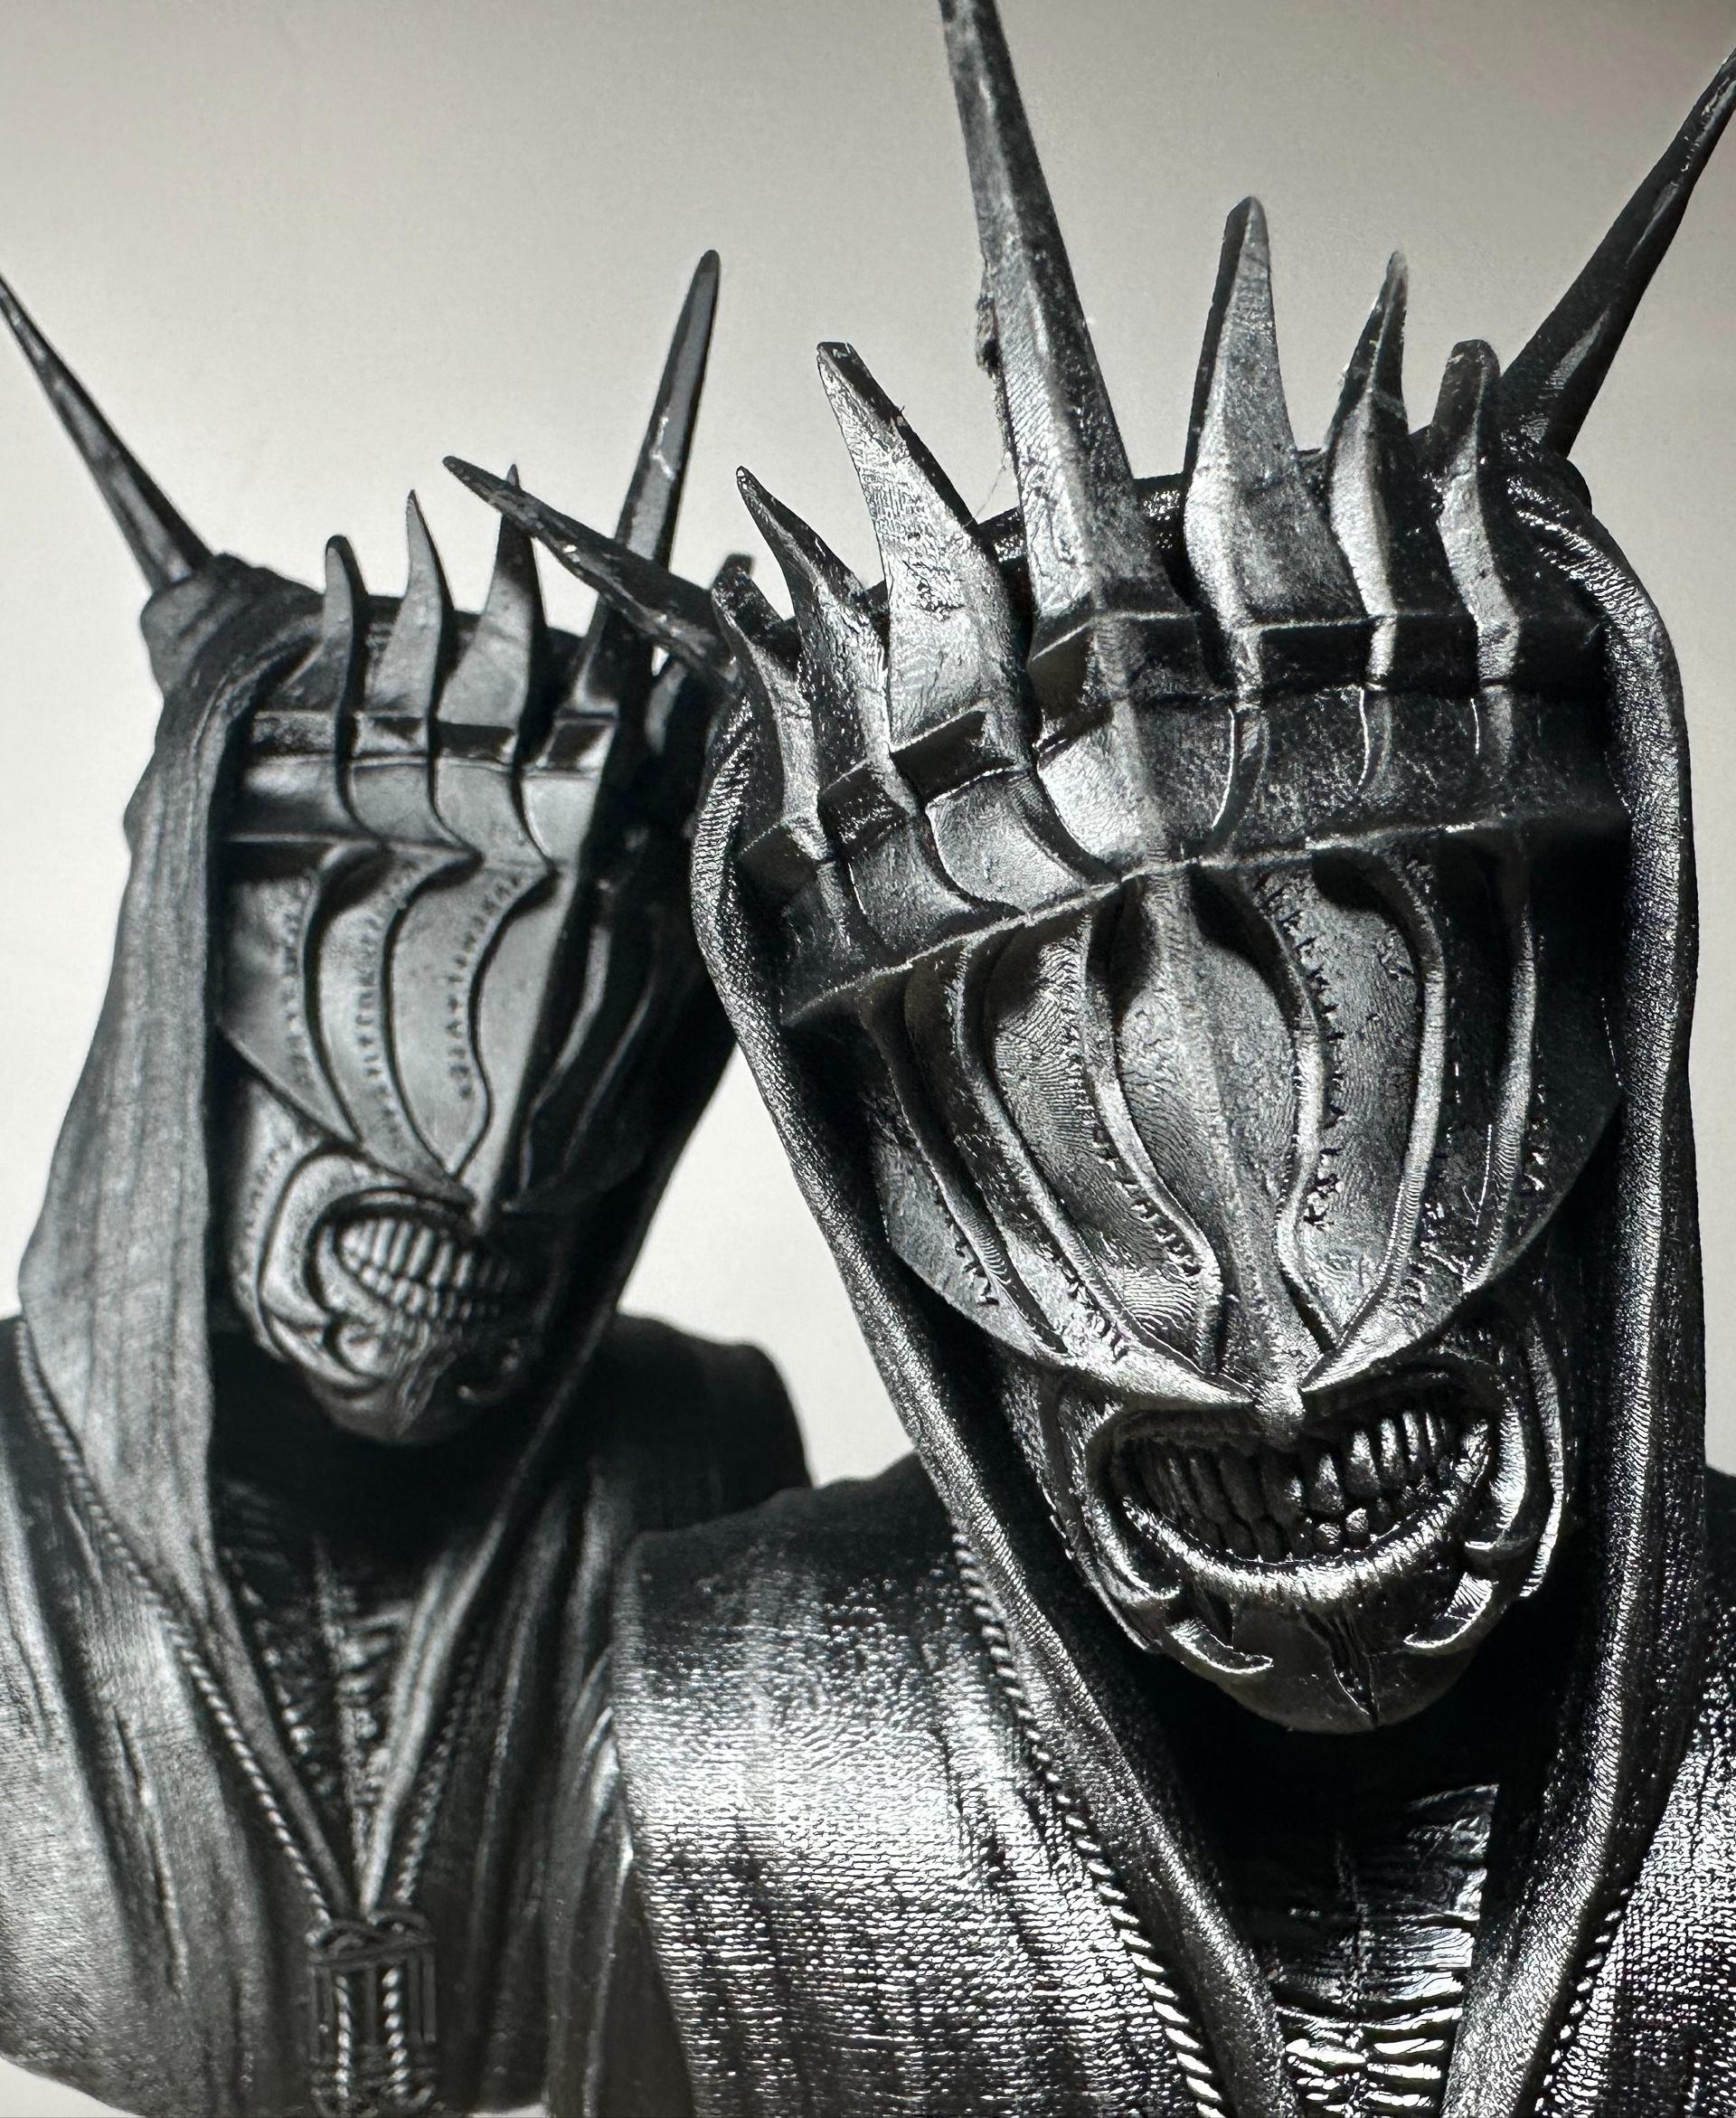 Mouth of Sauron bust (Pre-Supported) - This looks like it should be an album cover.

Printer: Anycubic Photon Mono X 6Ks
Resin: ABS-Like Resin Pro 2 (black) - 3d model